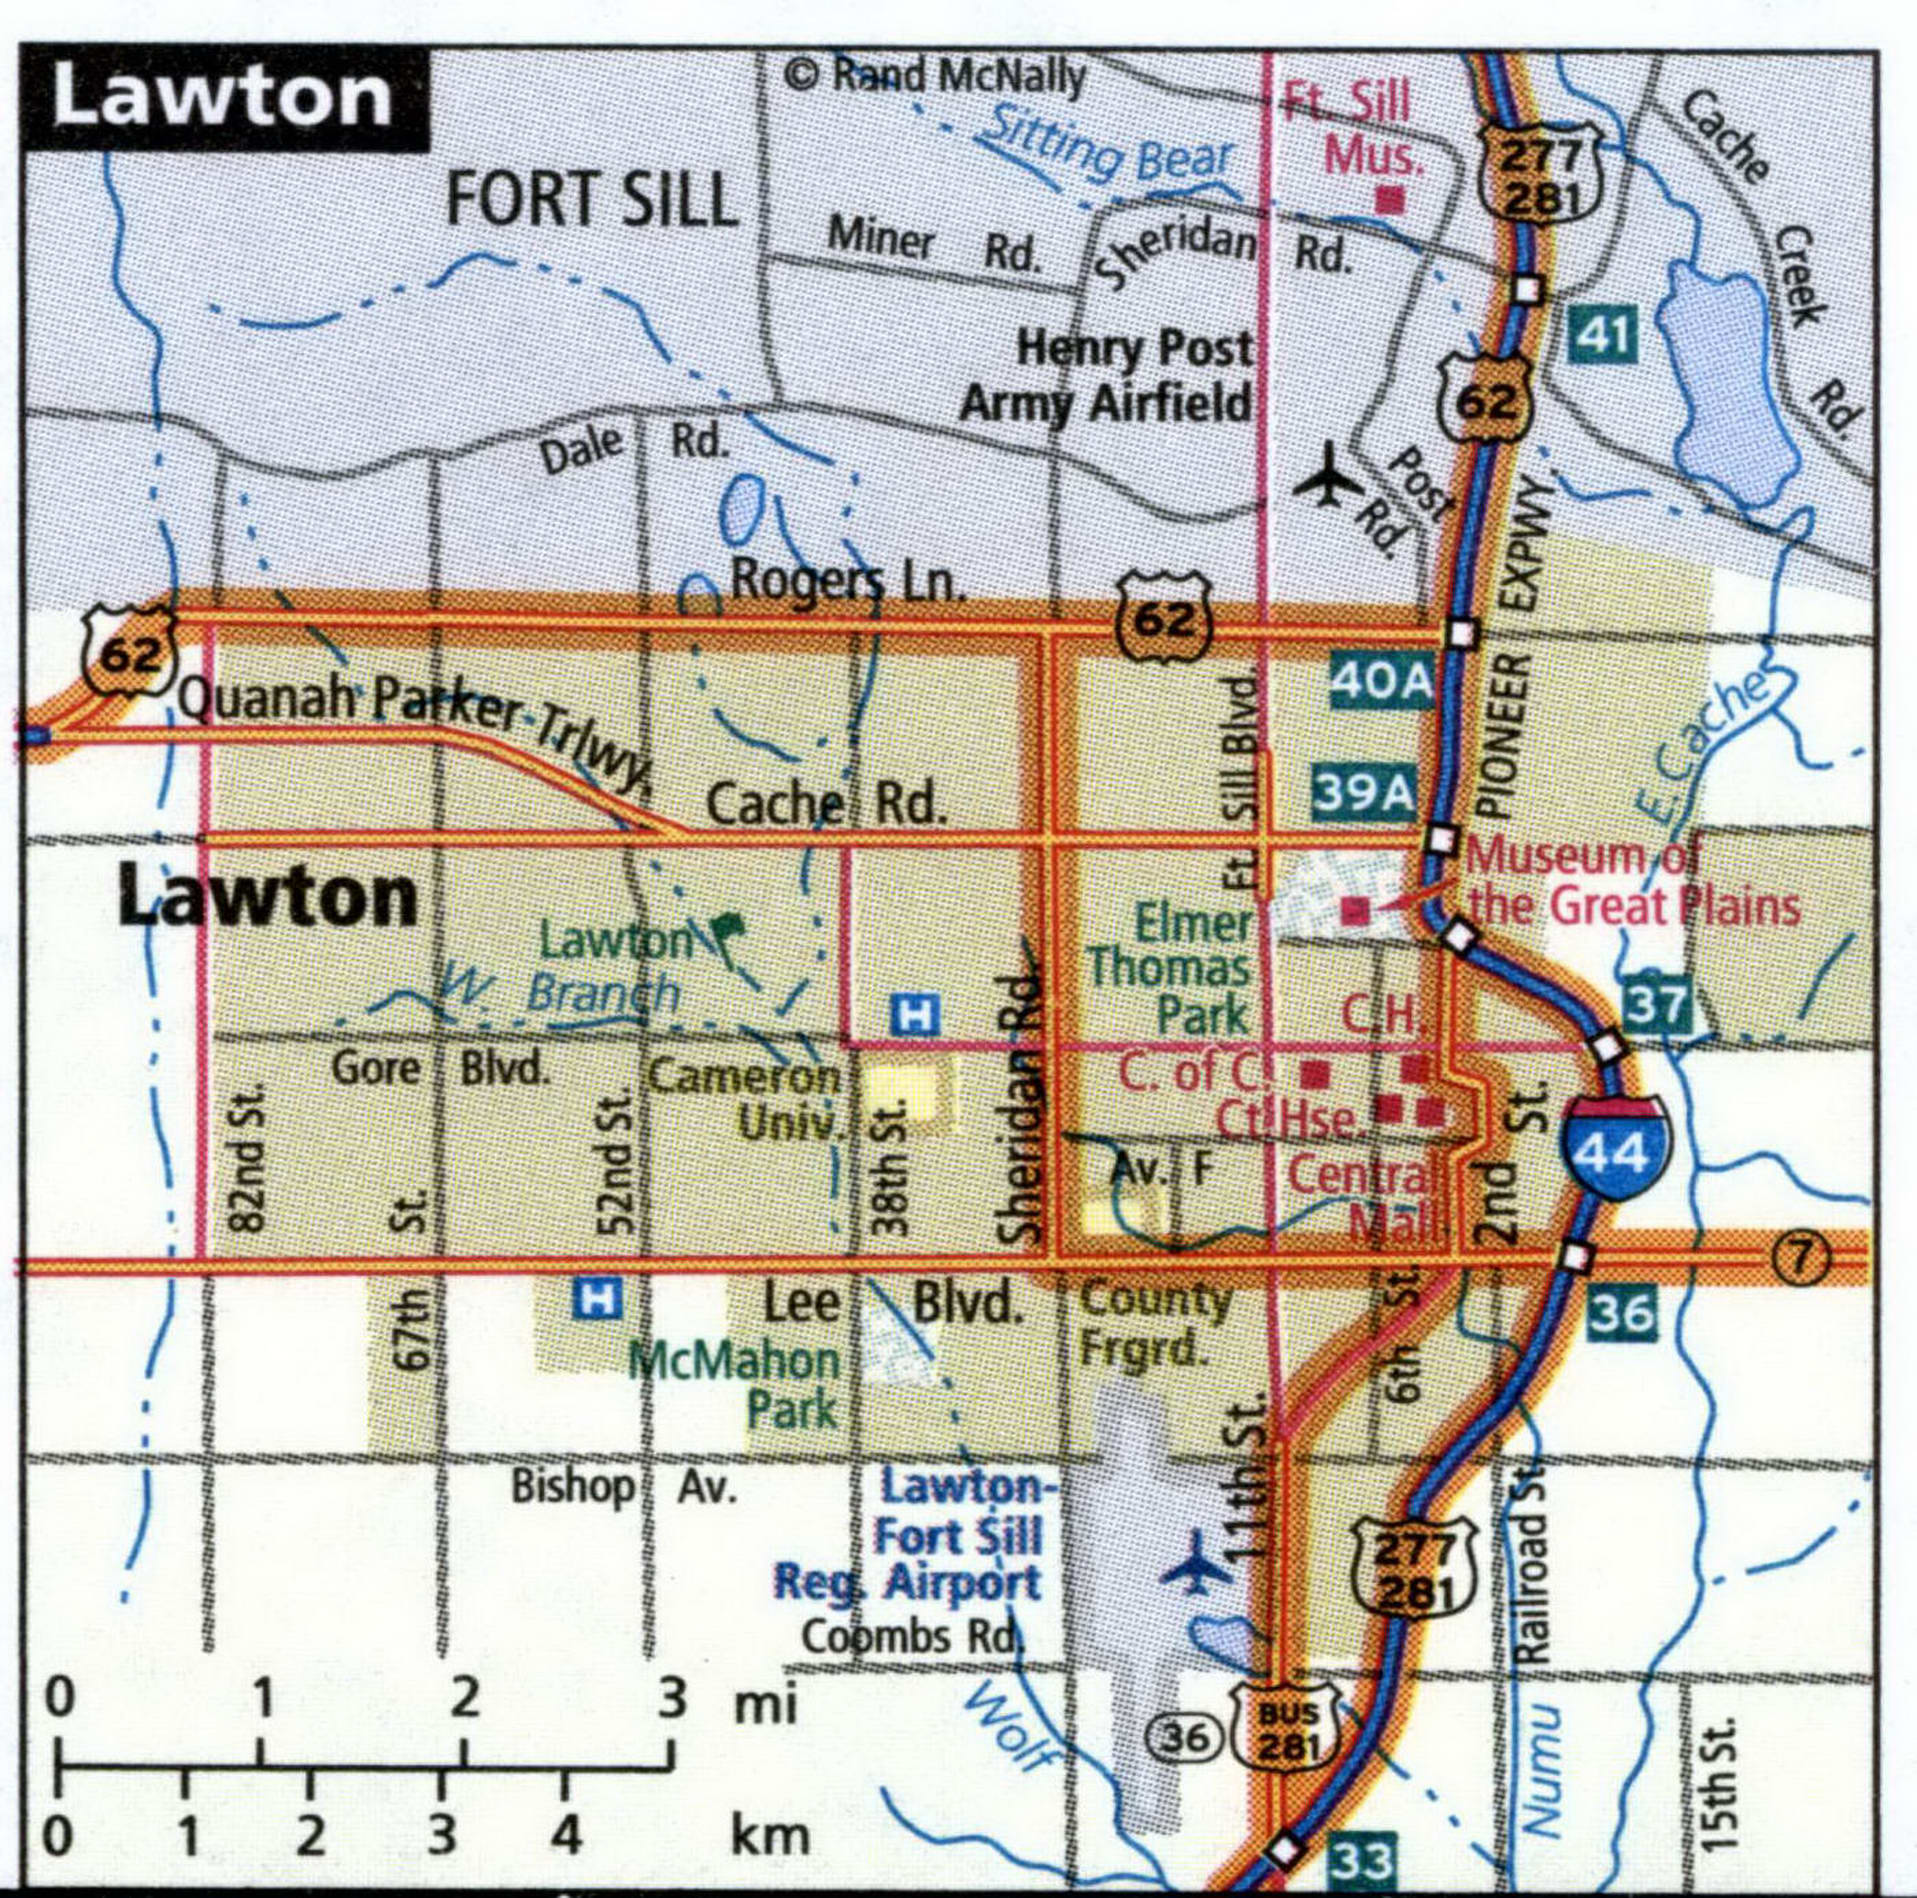 Lawton city map for truckers